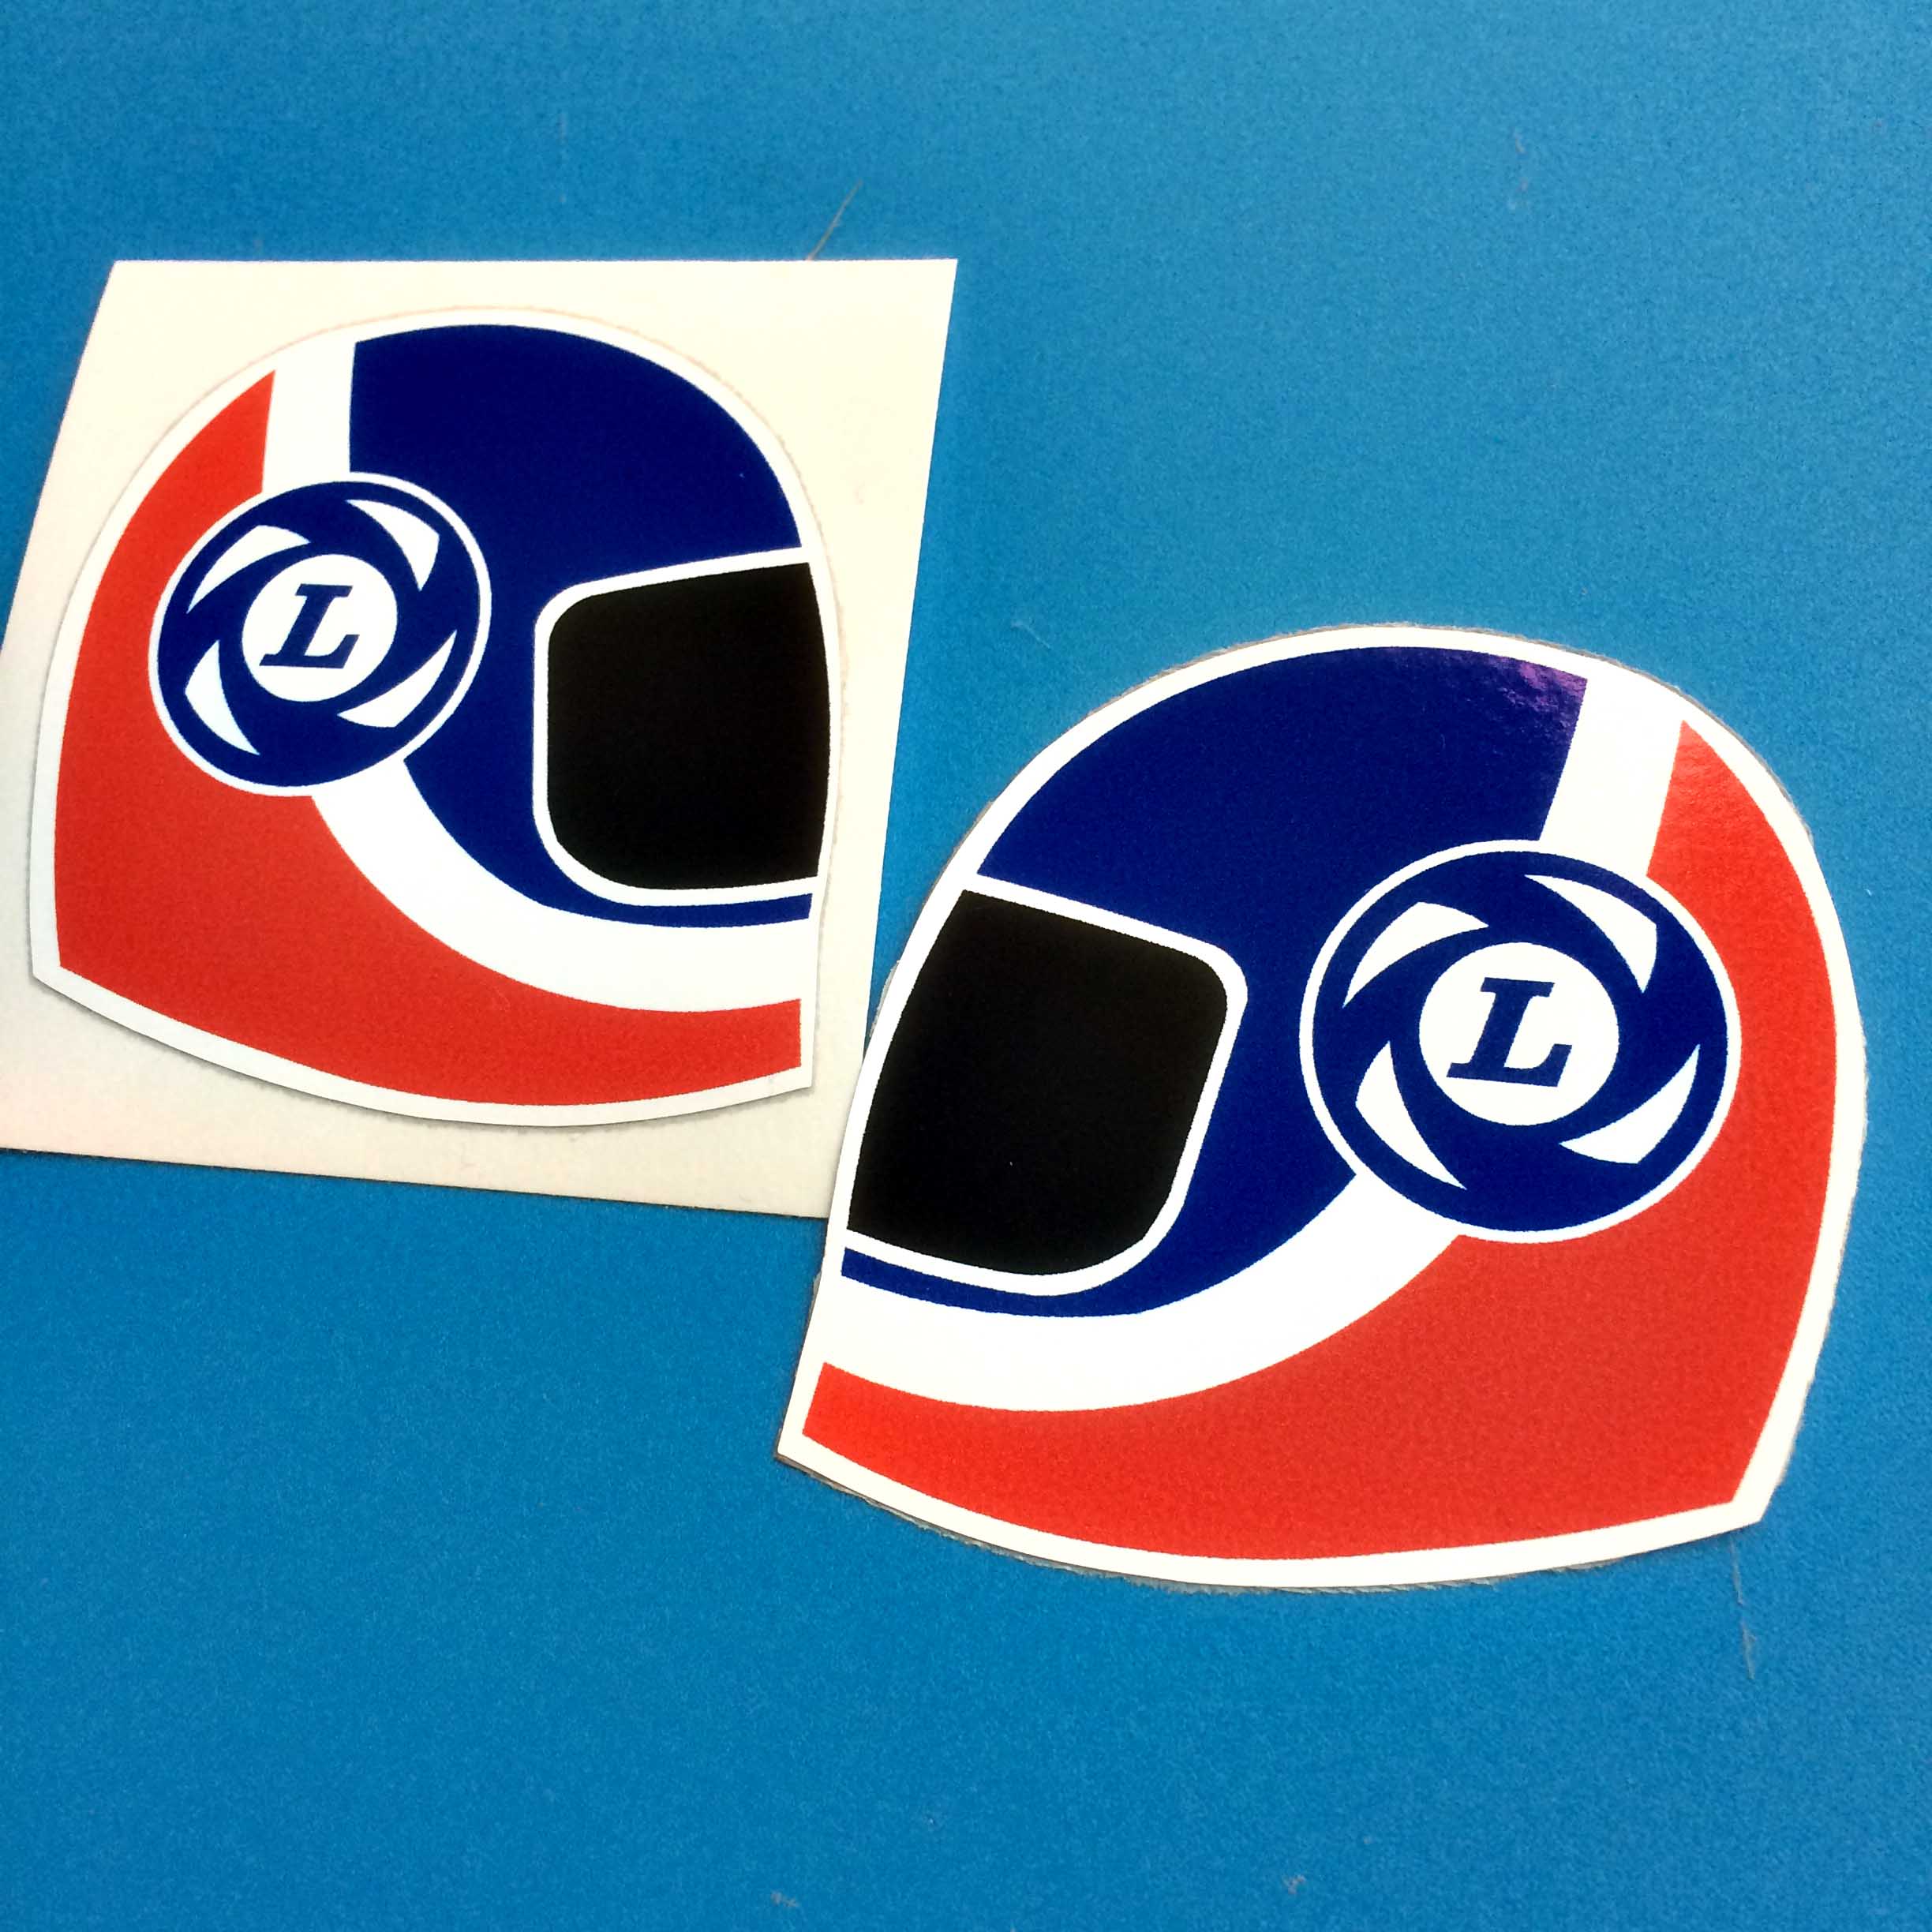 Red, white and blue motorbike helmet. British Leyland blue and white L logo is next to the visor.